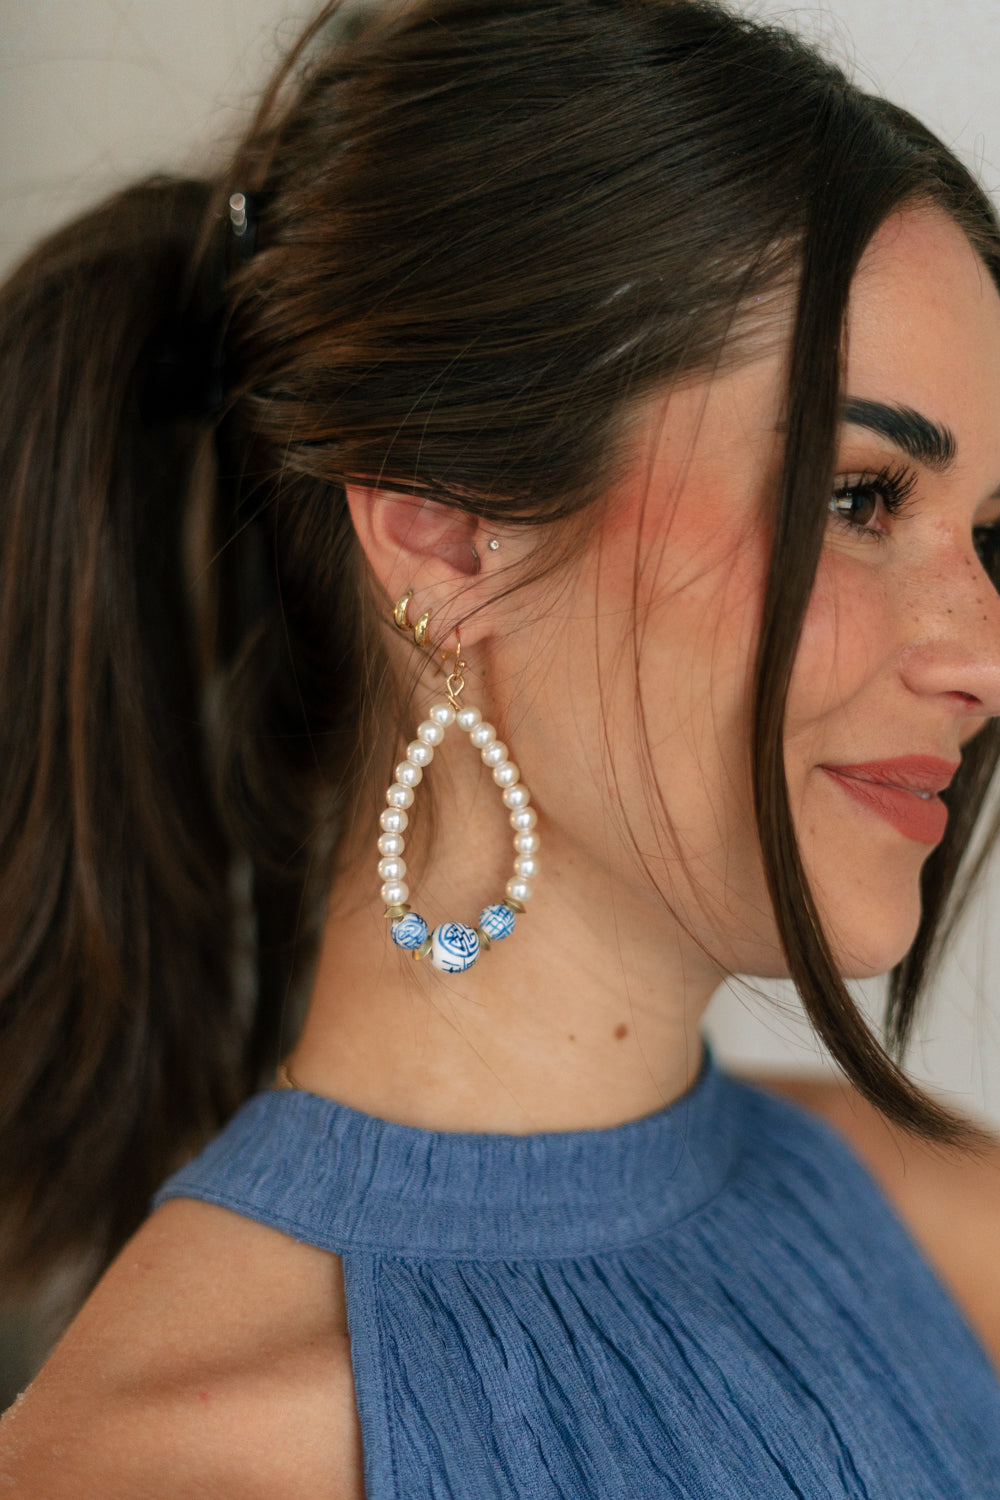 SIde view of female model wearing the Sienna White & Blue Pearl Dangle Earring which features  teardrop, dangle earrings with white pearls and blue design beads